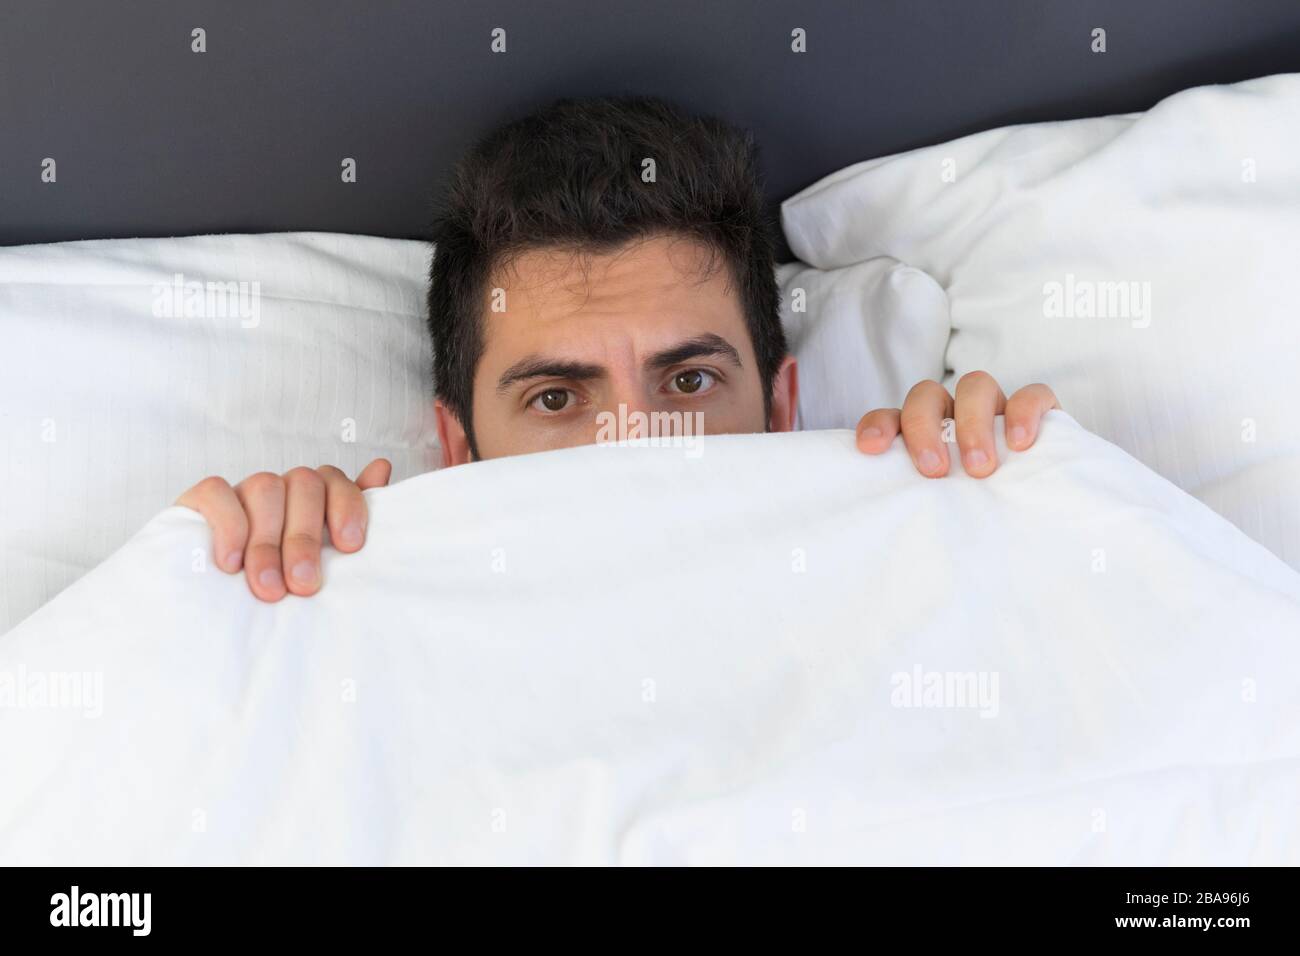 A young man is hiding in bed under a blanket at home. Fear and surprise are visible in his eyes. Stock Photo